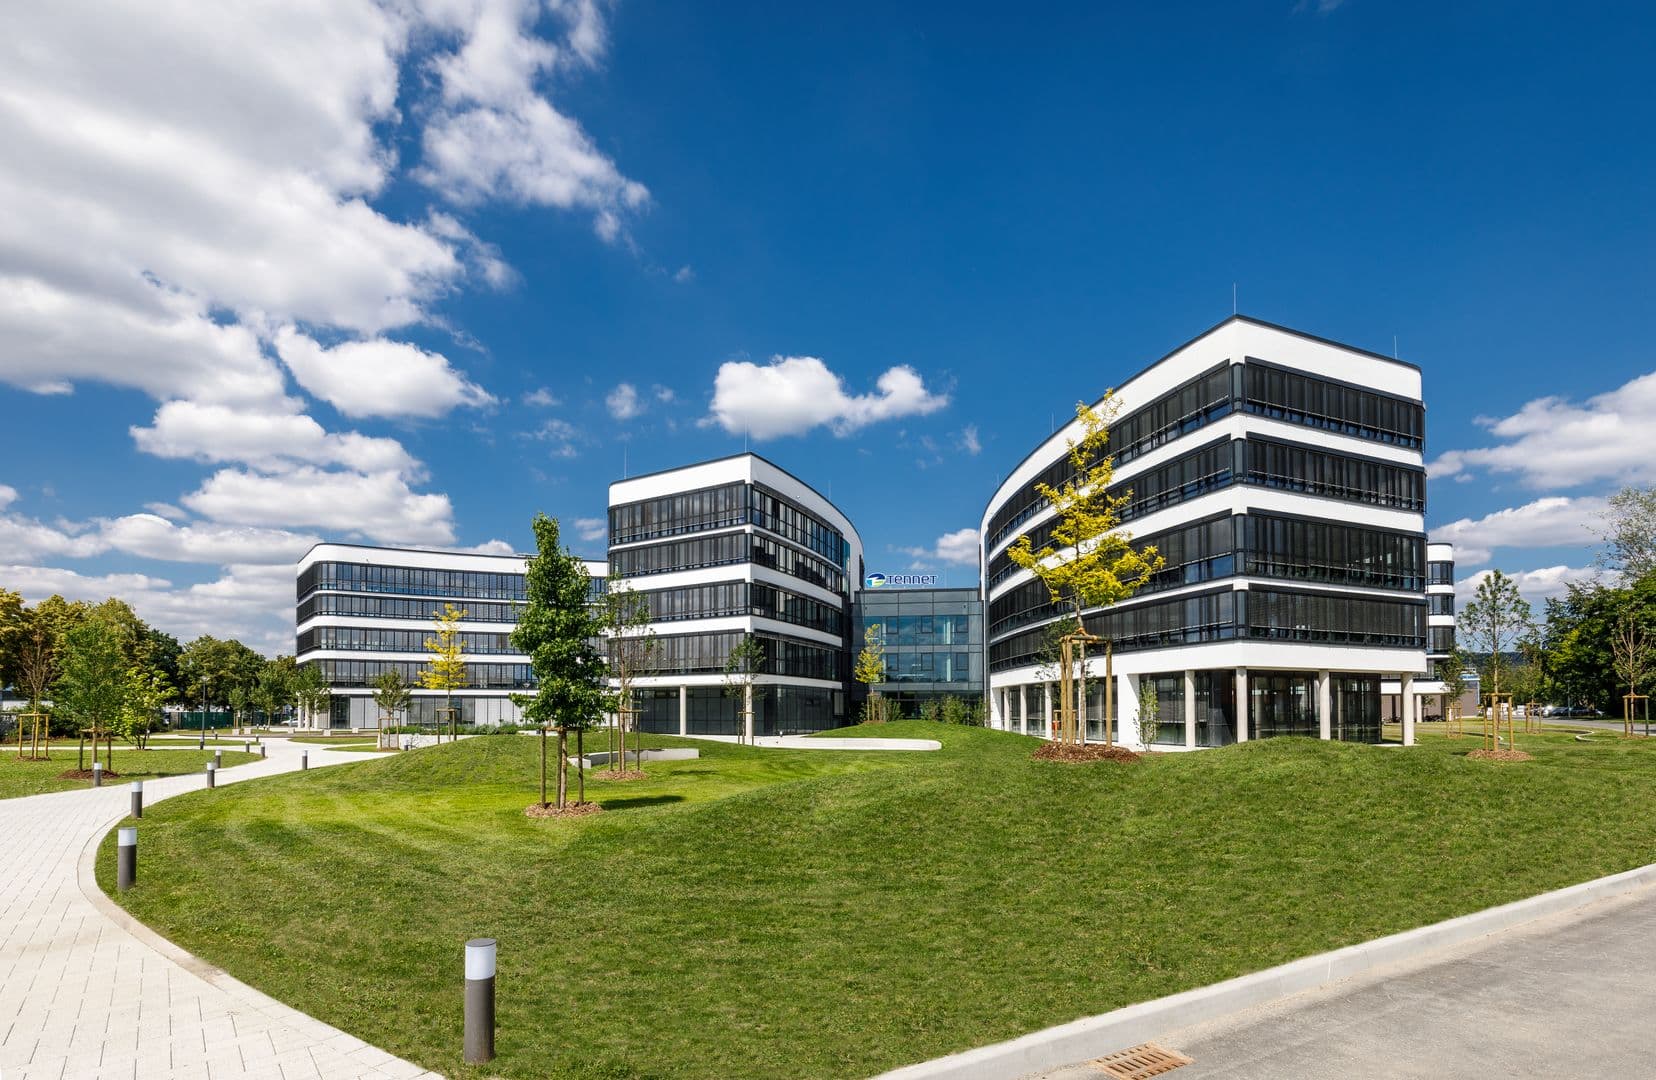 Exterior view of the TenneT campus in Bayreuth, Germany